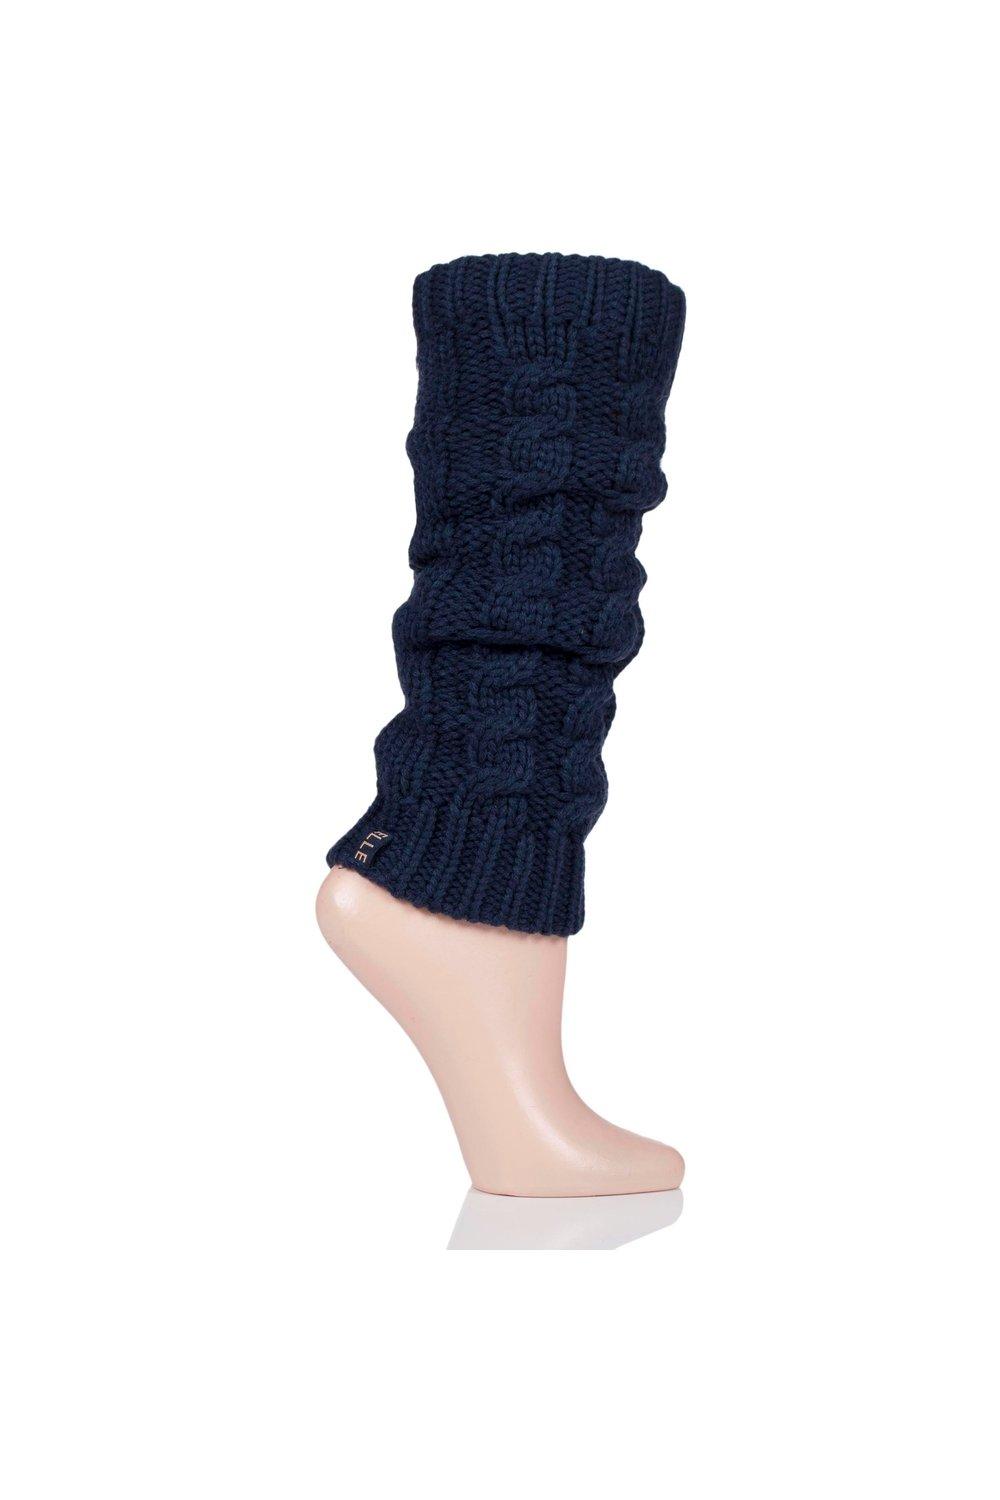 1 Pair Chunky Cable Knit Leg Warmers